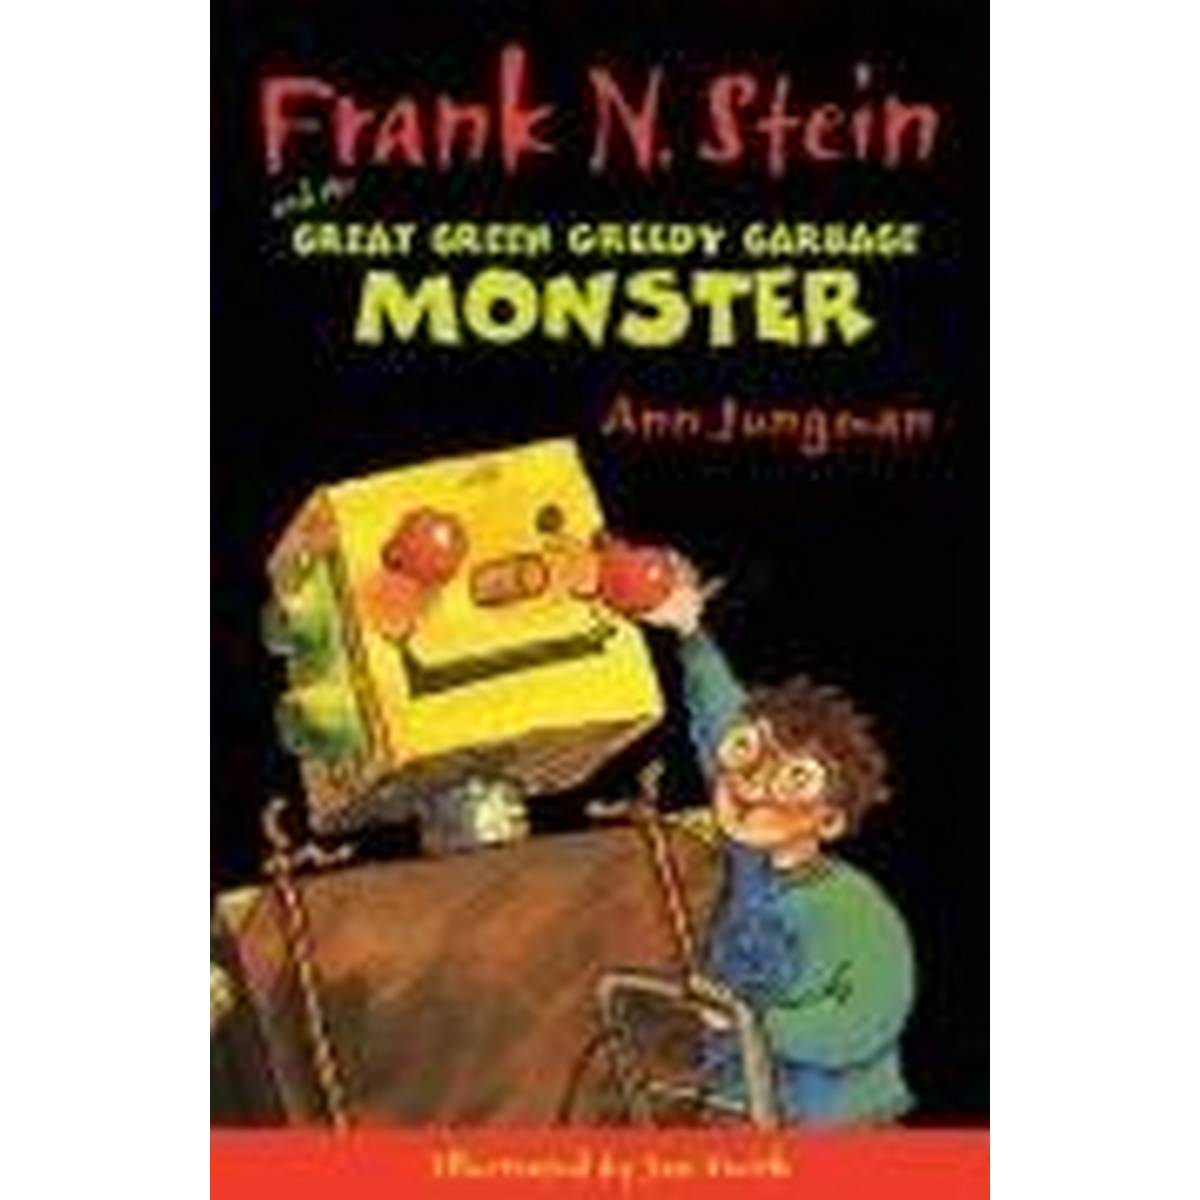 Frank N. Stein and the Great Green Greedy Garbage Monster